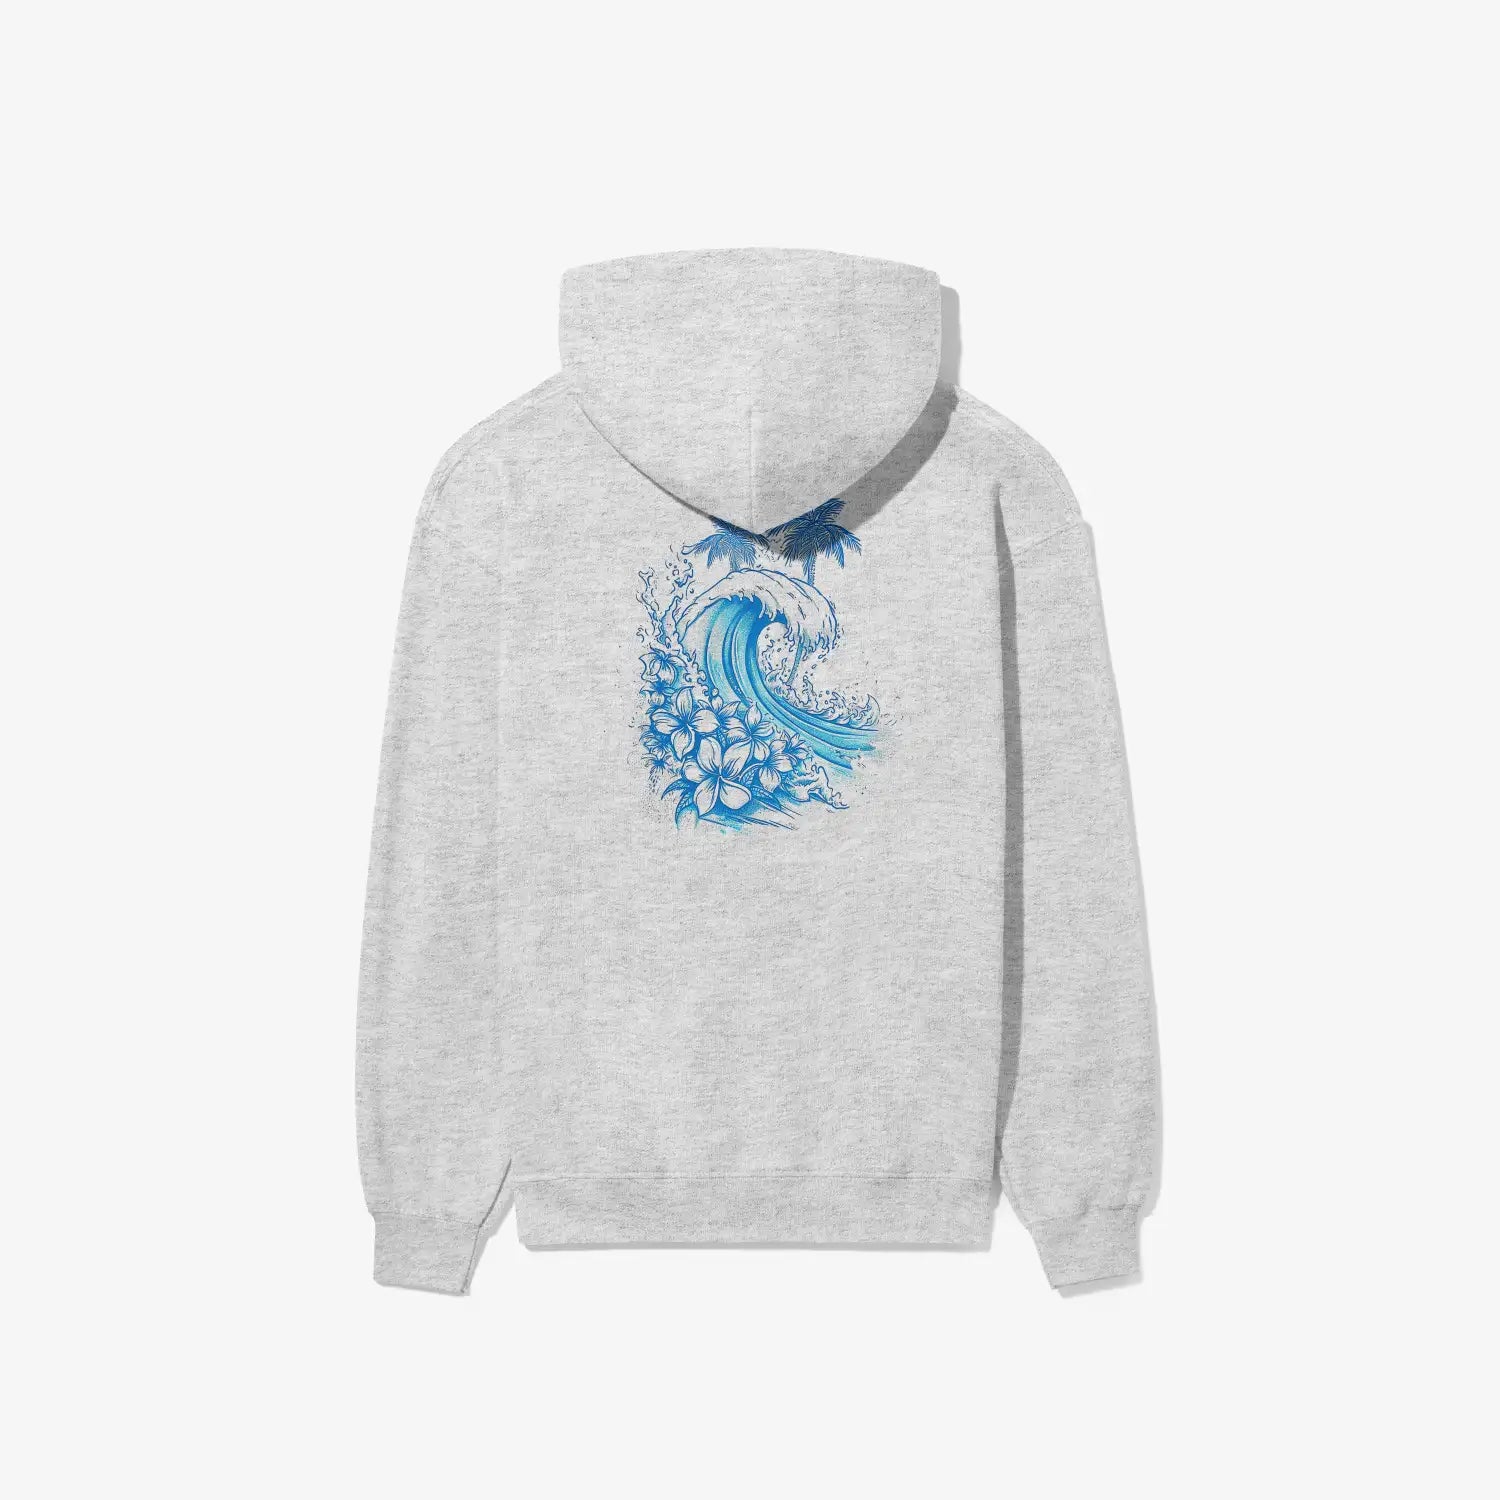 The Be Still and Know Kupa'a Tide Hoodie features a blue wave on its grey fabric, representing unwavering faith.